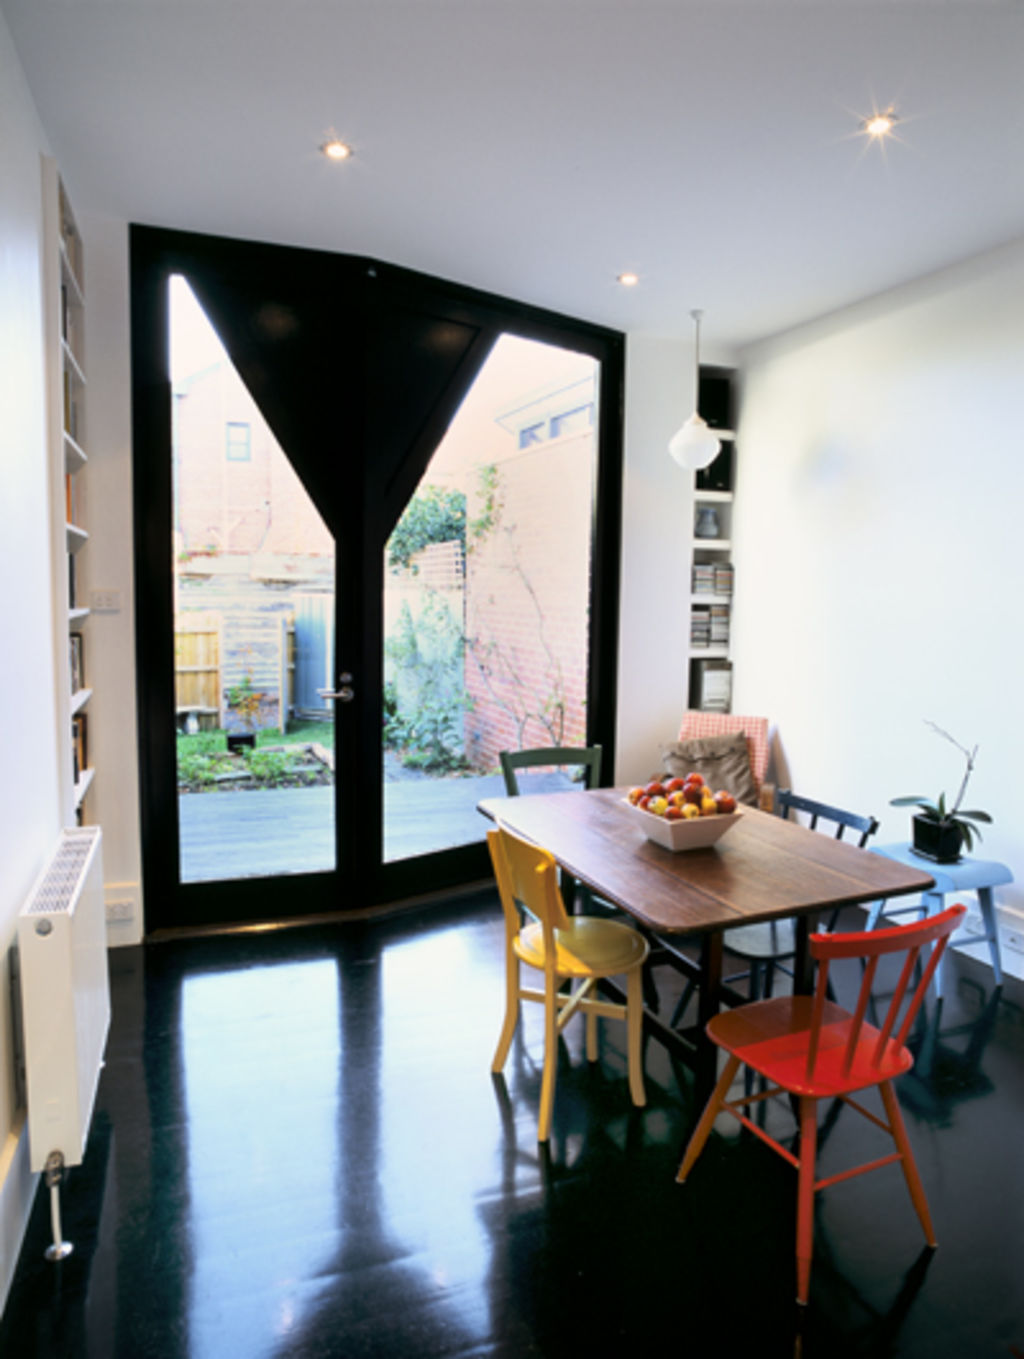 In 2001, as a new architect with no prior examples of her work to show to clients, Ilana Kister was recommended to the Howe Street owners. Photo: Andrew Ashton